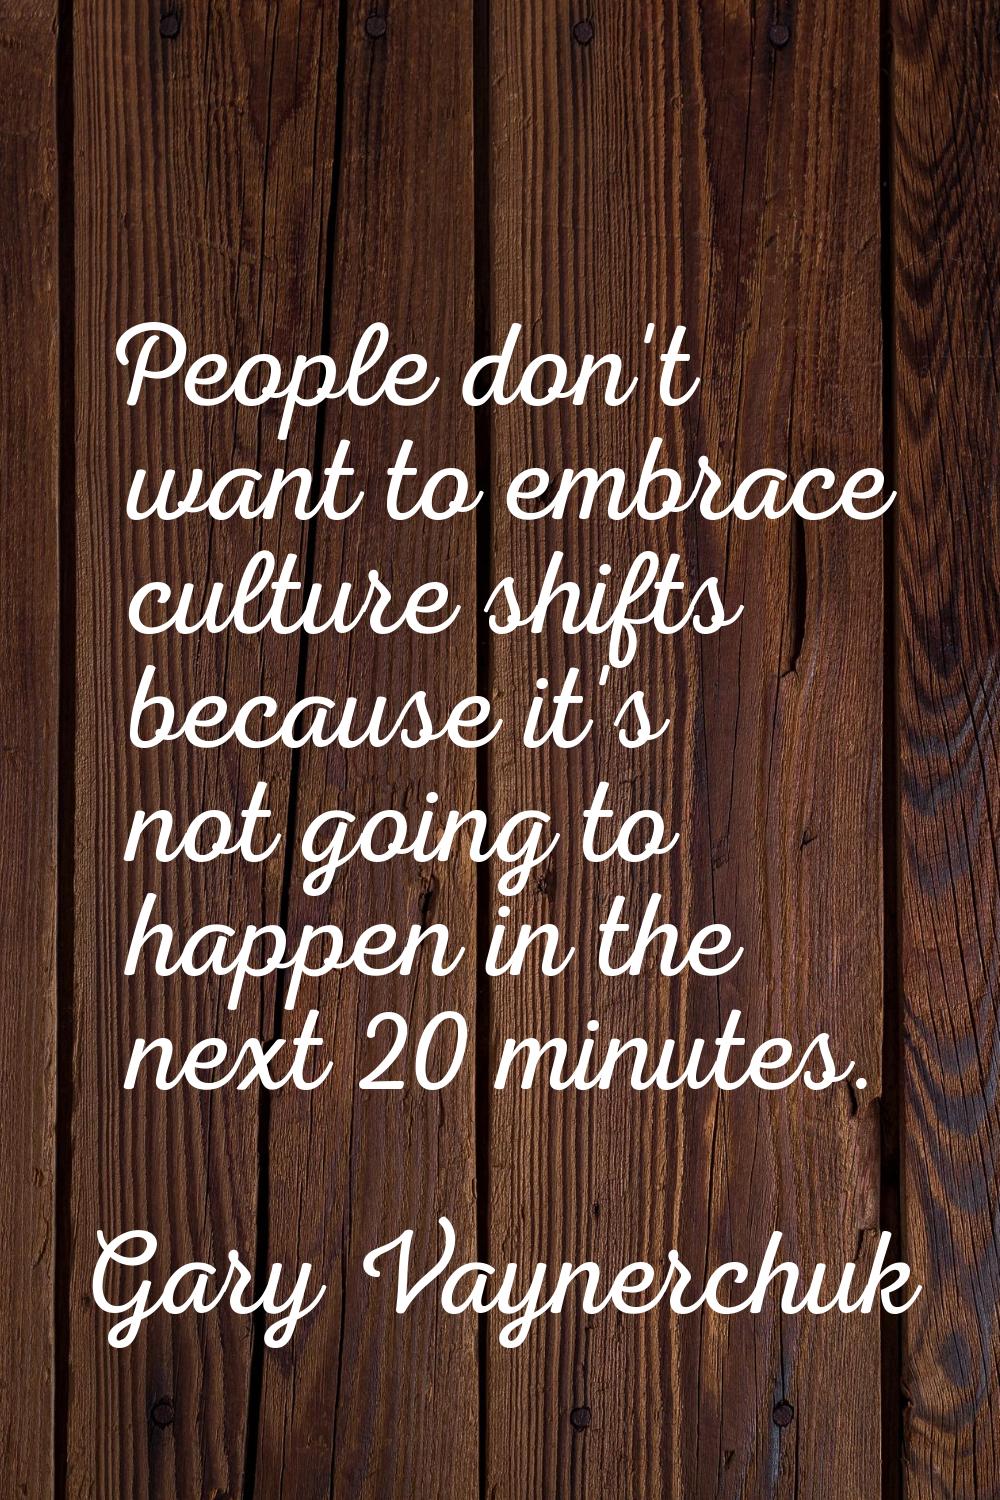 People don't want to embrace culture shifts because it's not going to happen in the next 20 minutes